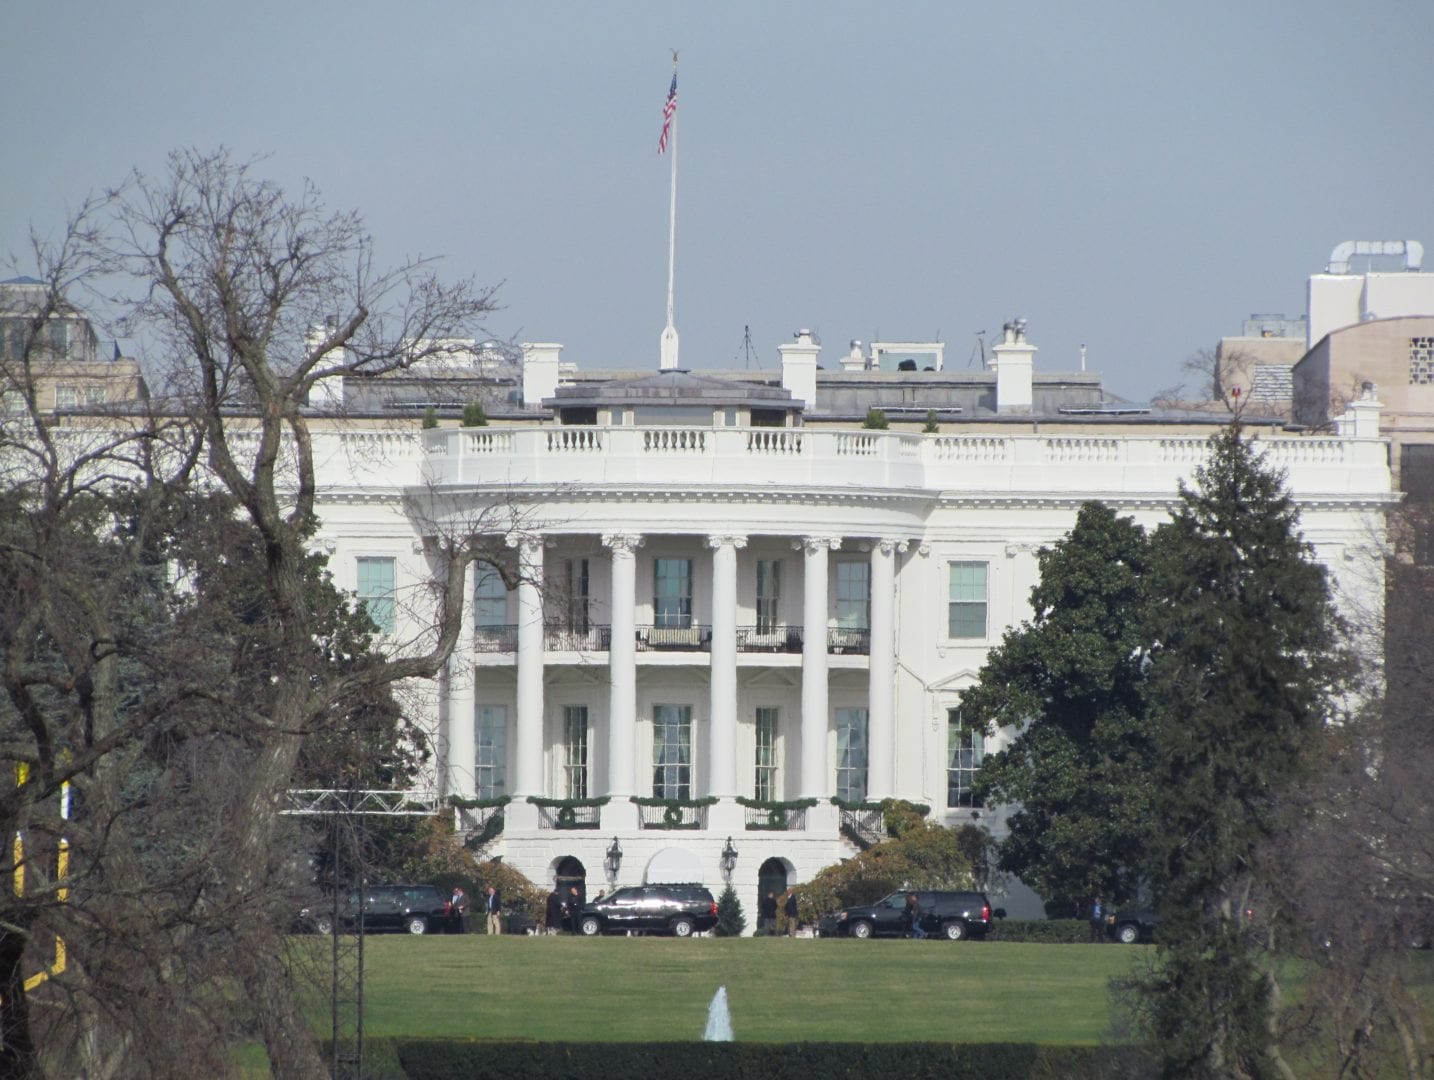 A view of the White House